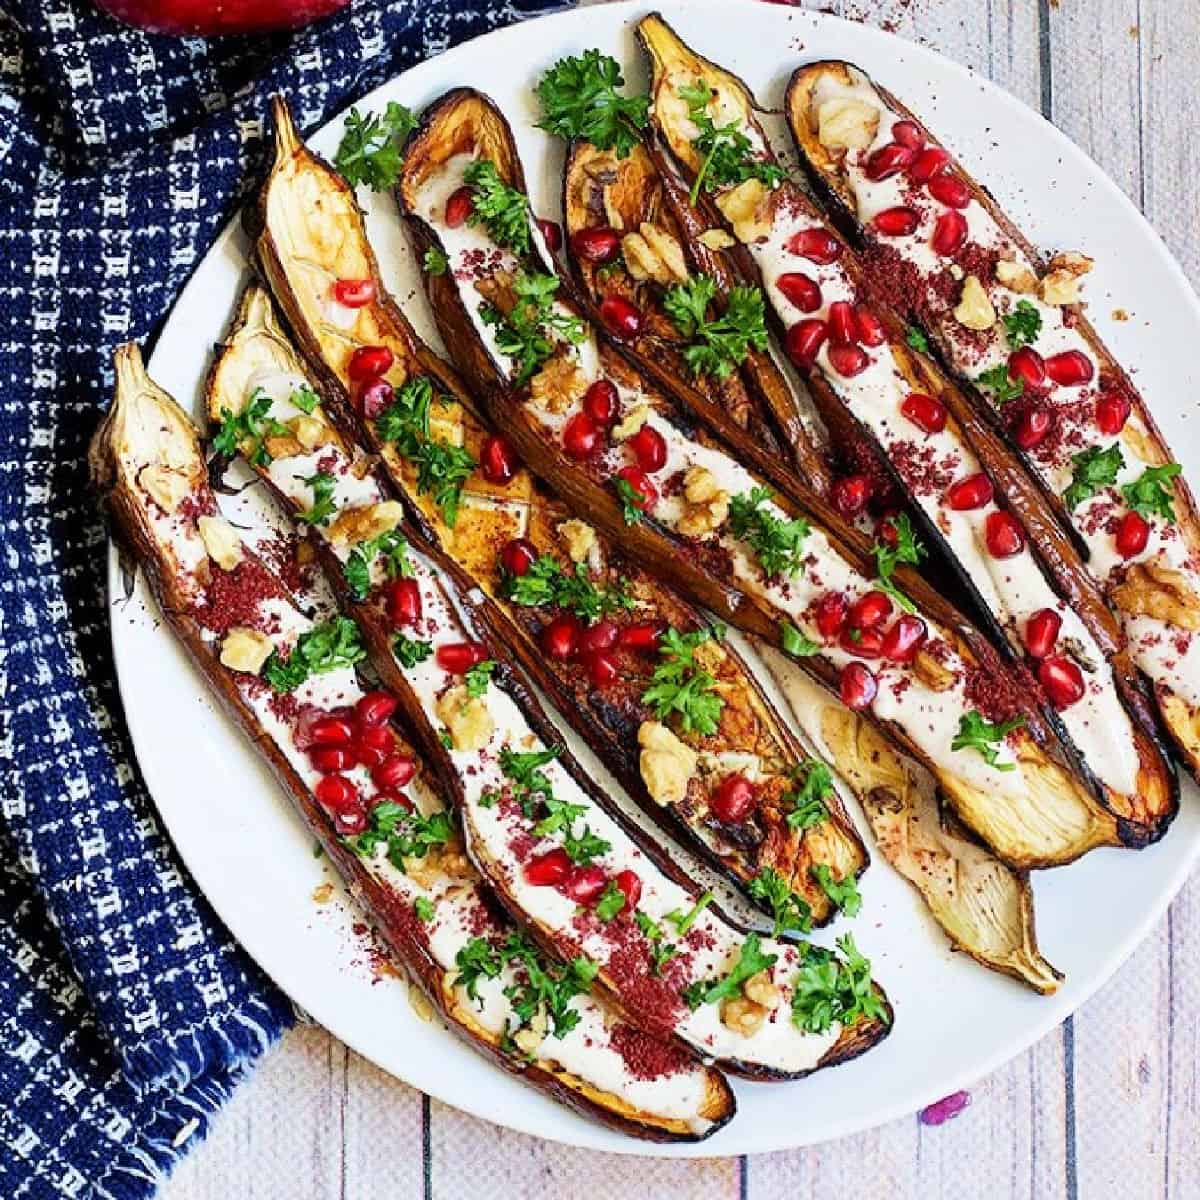 This is a great Middle Eastern eggplant recipe to always keep on hand. Perfectly roasted eggplant is served with a stunning tahini yogurt sauce and pomegranate arils. It's perfect as a side dish or an impressive appetizer!